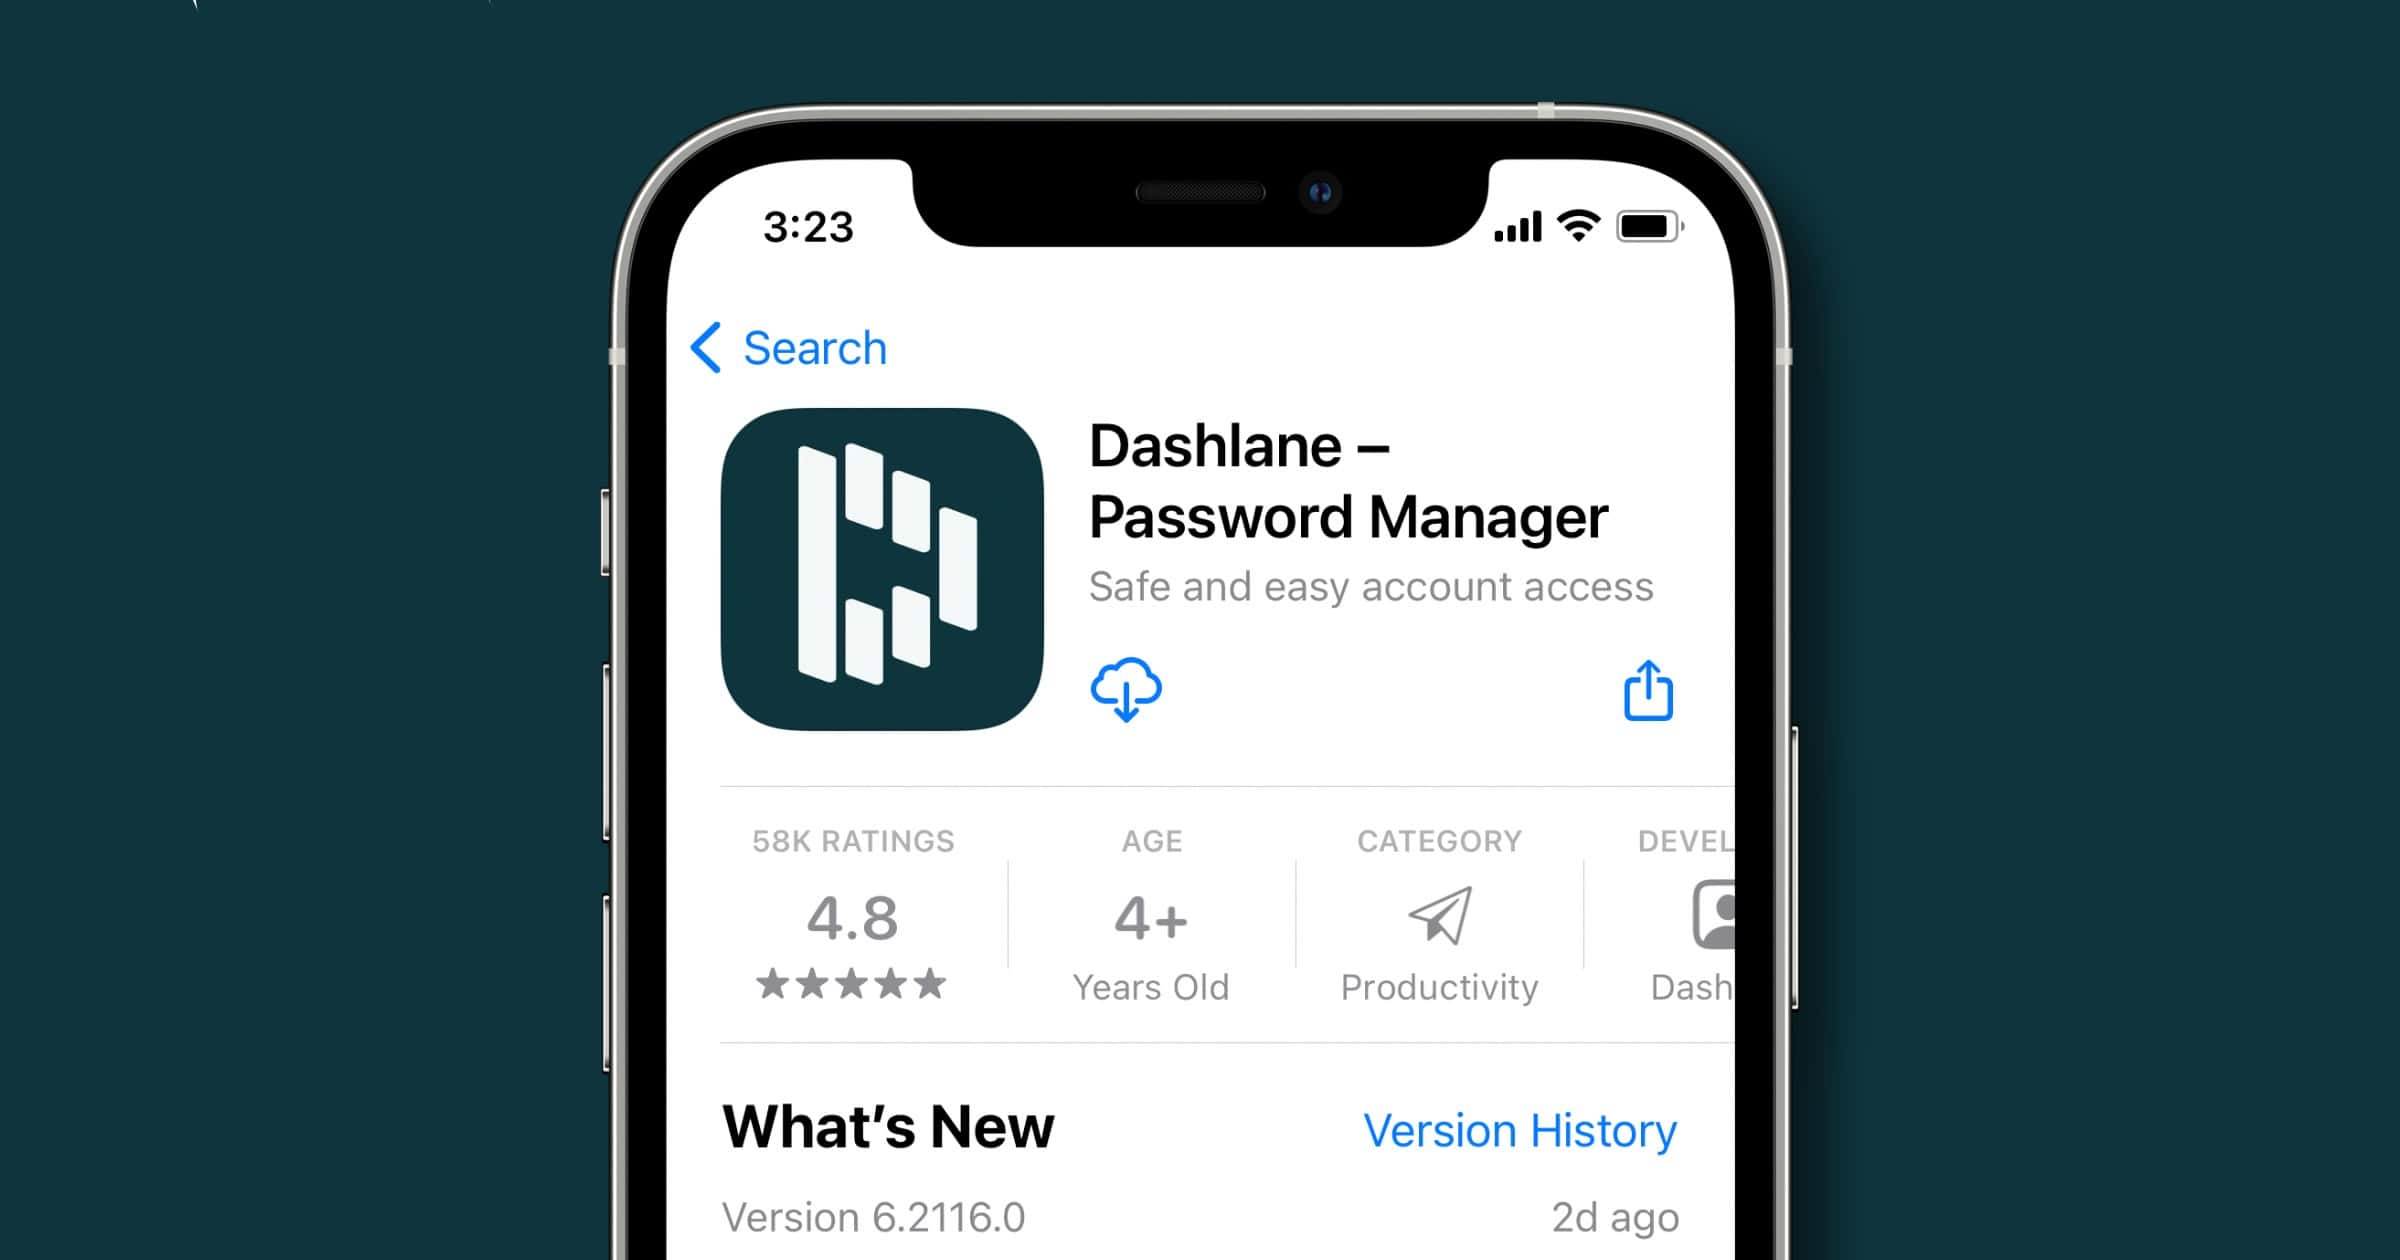 ‘Dashlane’ Password Manager Updates With New Menu, Quick Actions